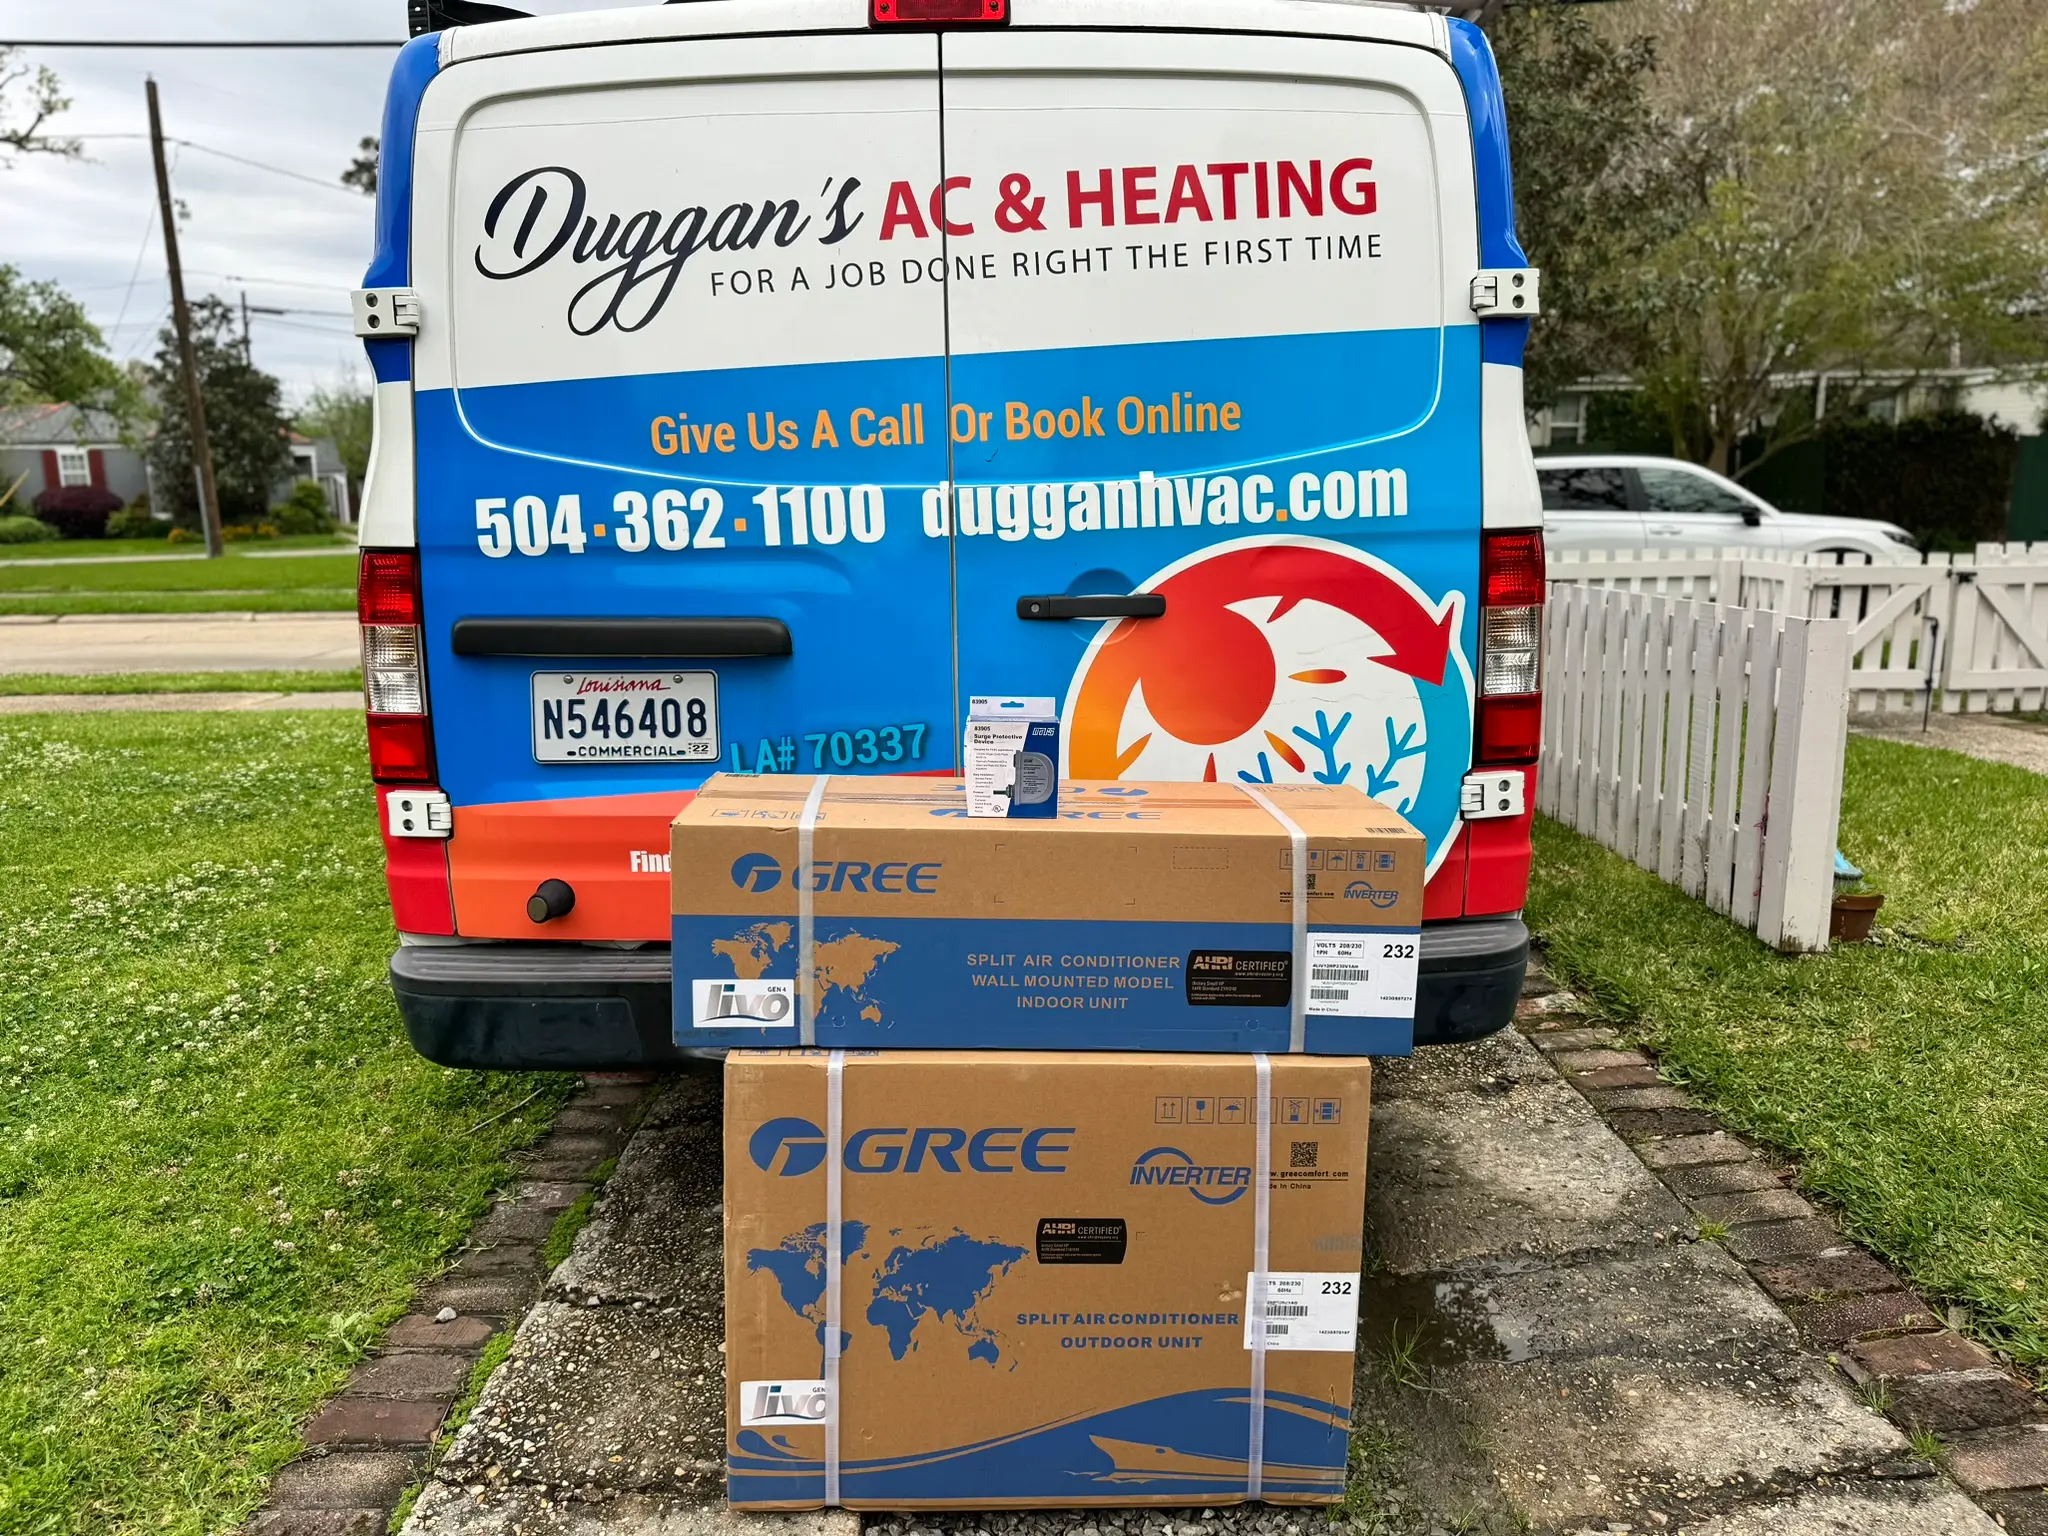 How Long Does it Take to Replace an HVAC System in Louisiana - An image of new AC Parts behind a Duggan's AC & Heating van.